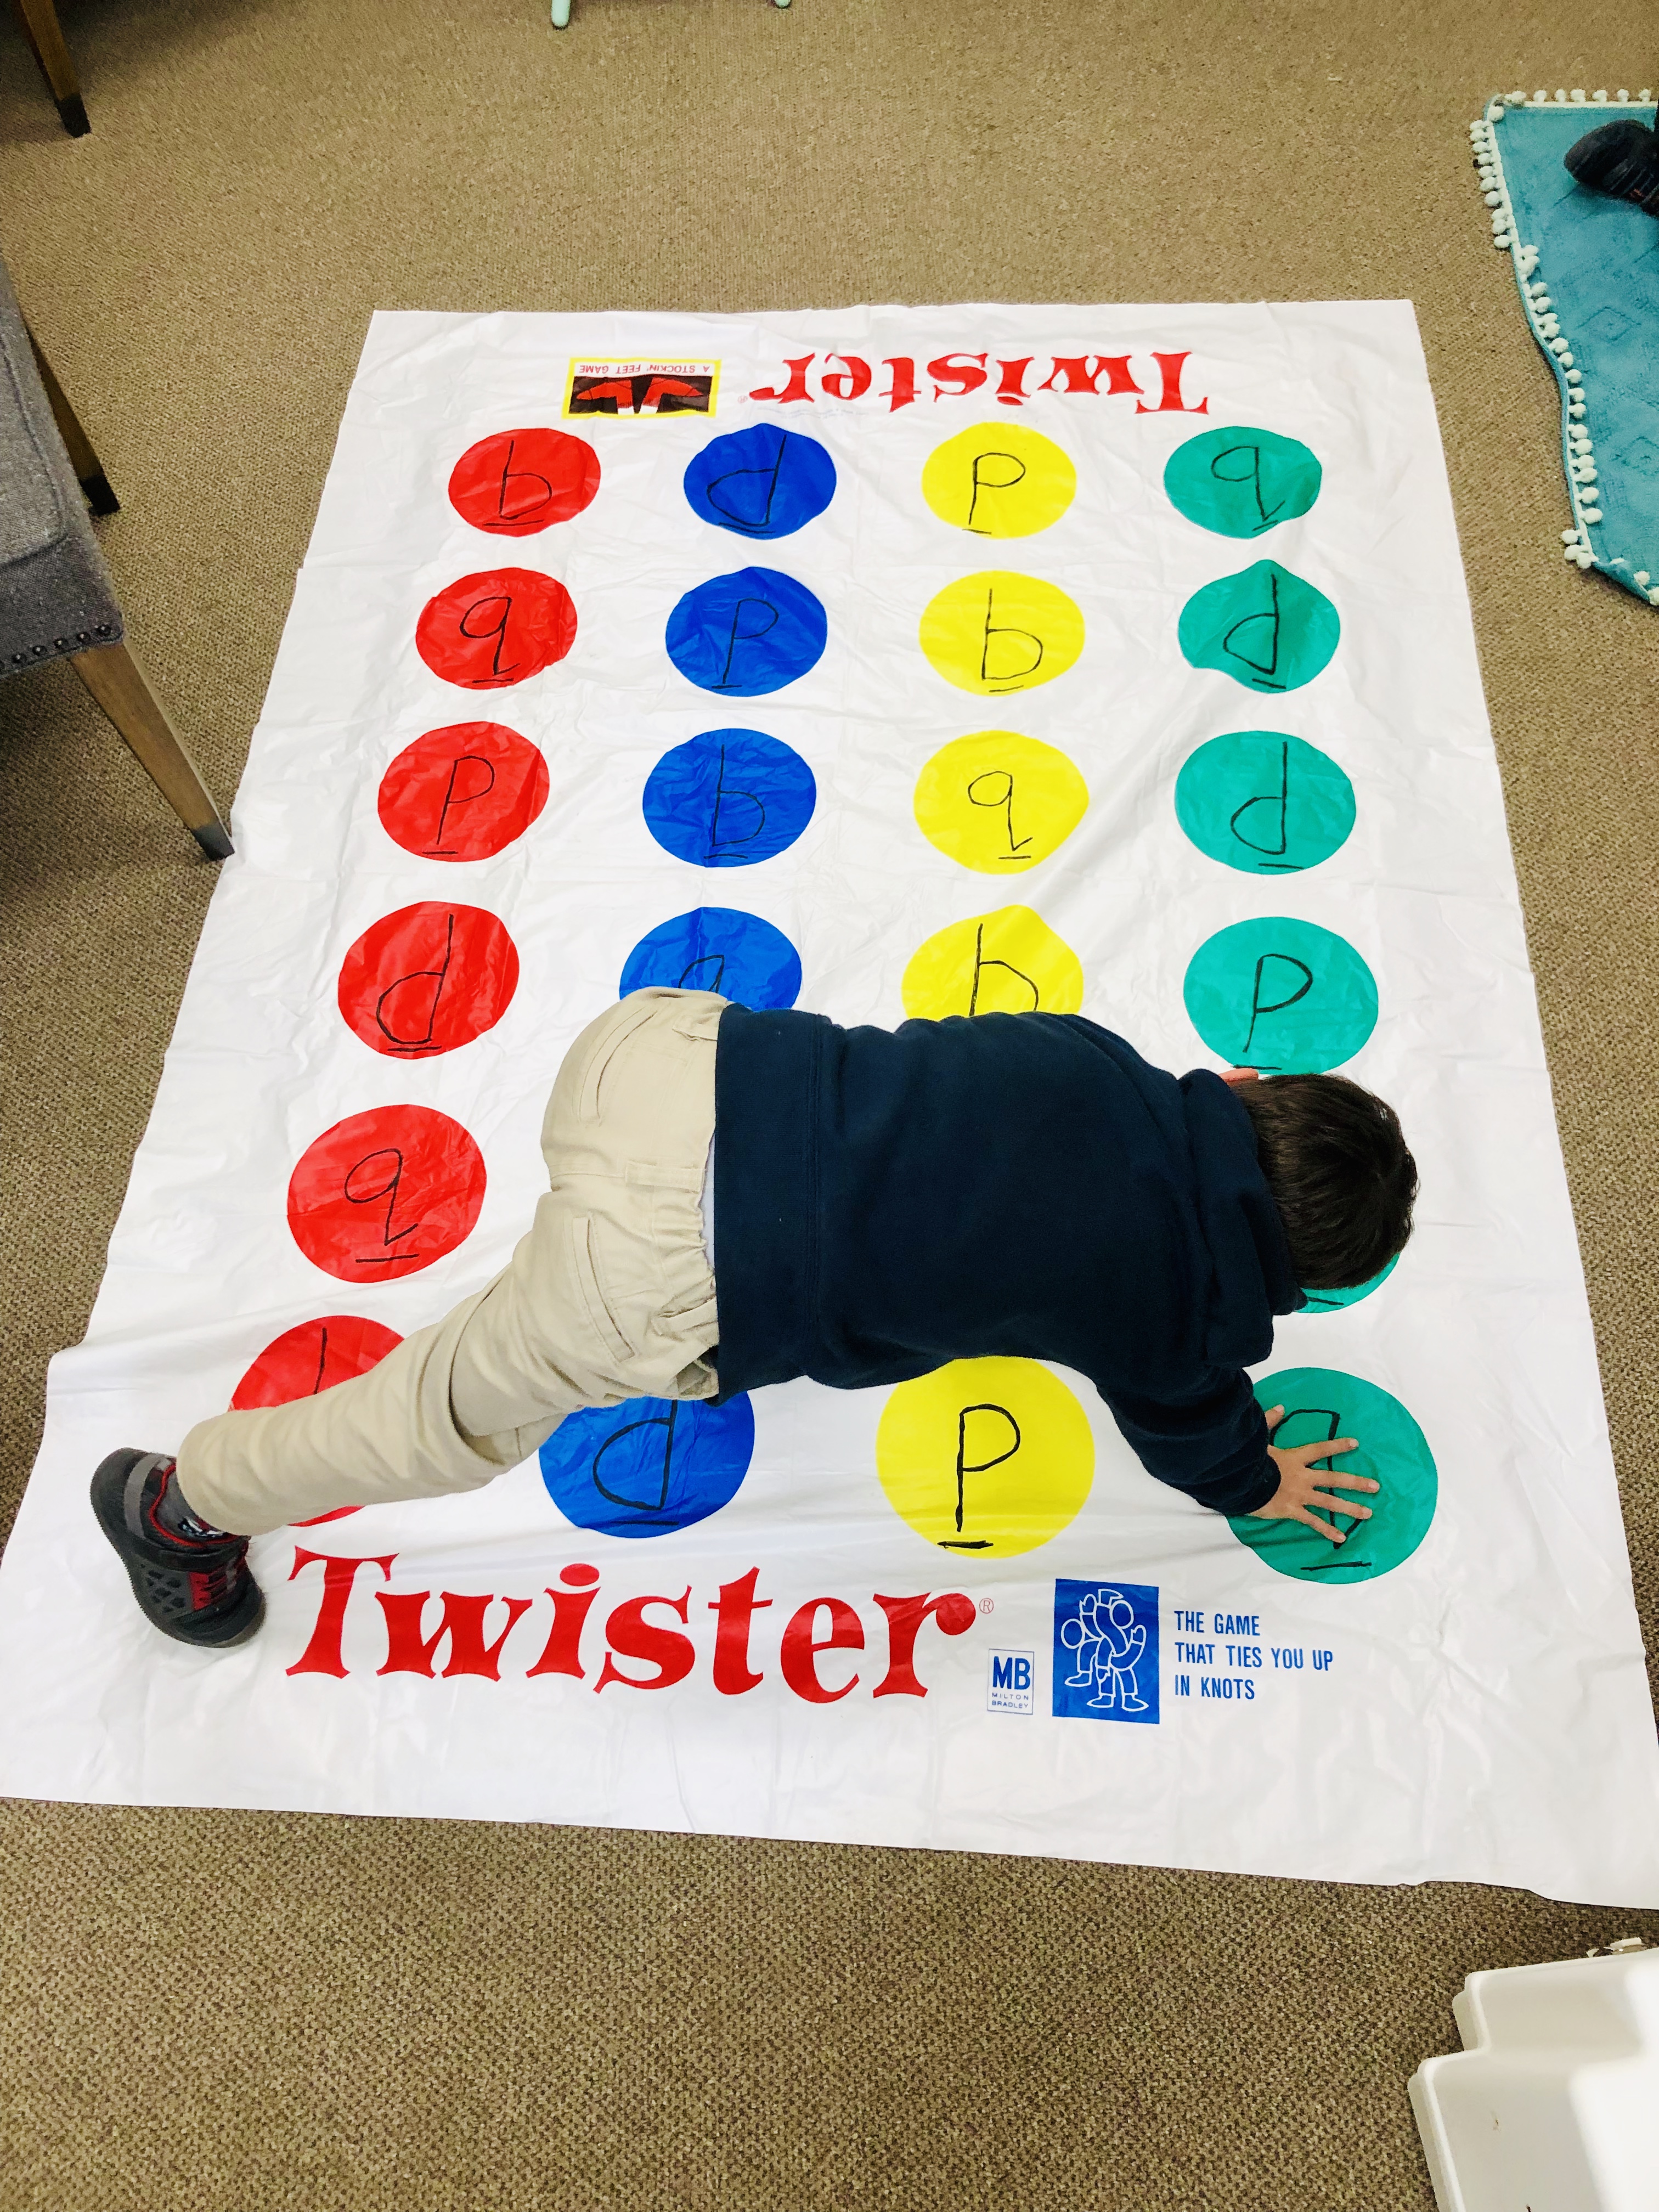 Twister in Occupational Therapy - Gillispie School